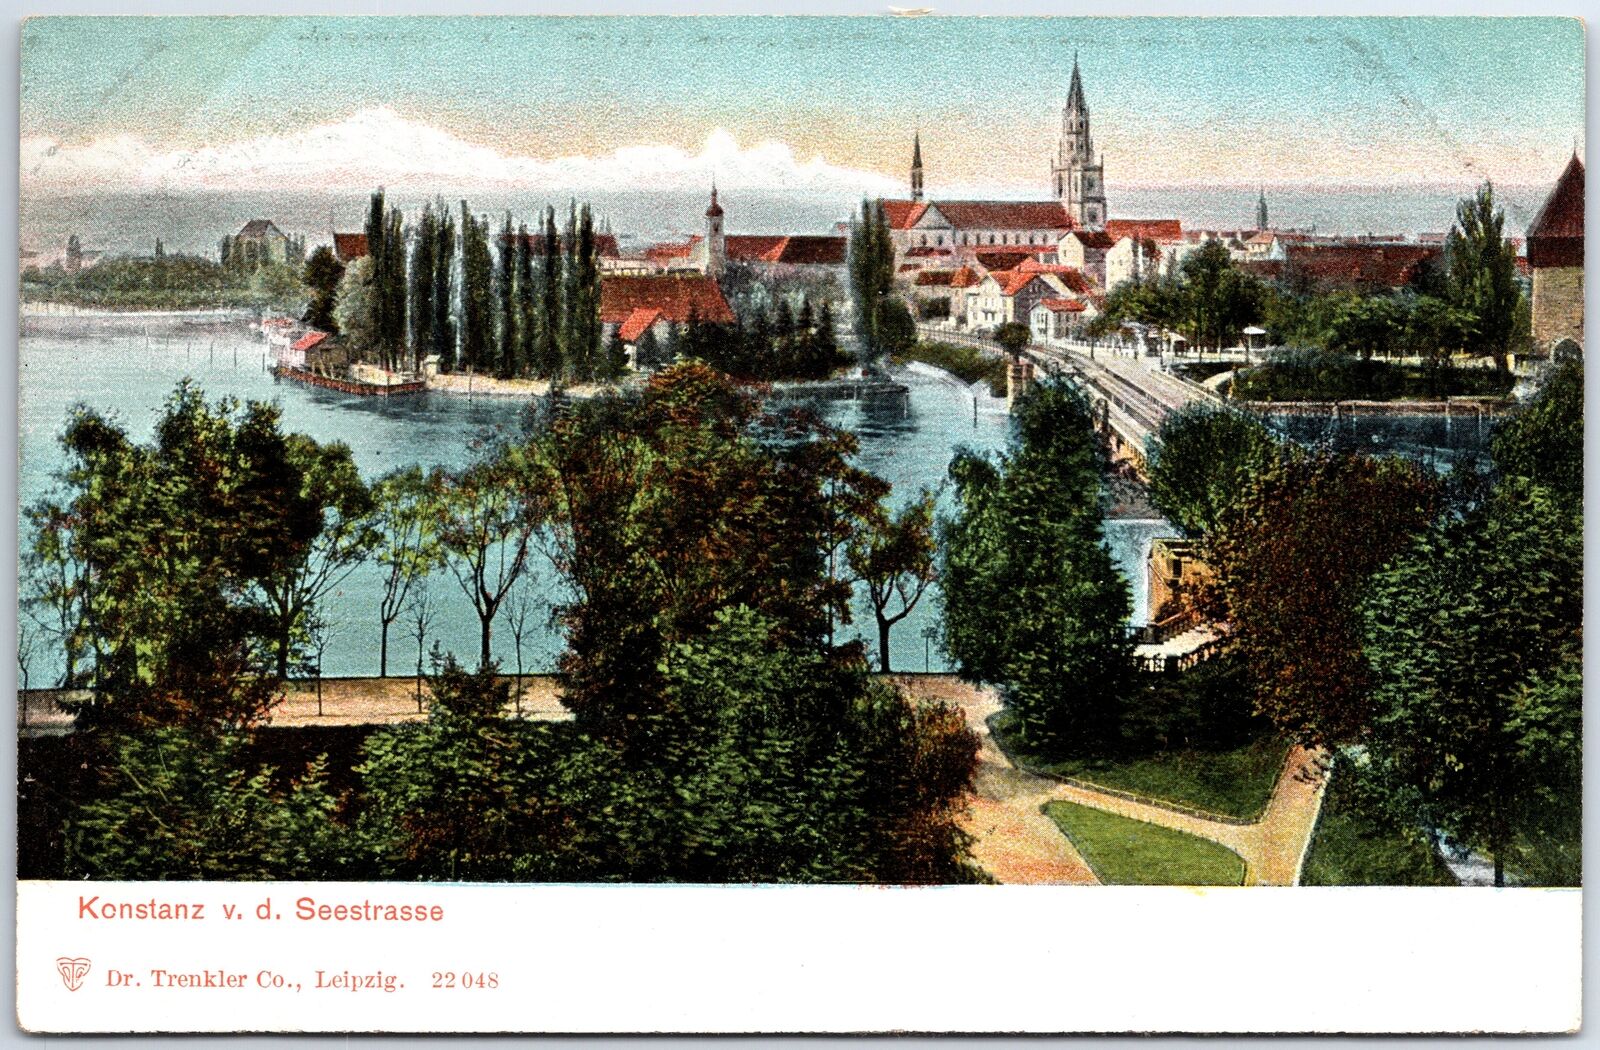 VINTAGE POSTCARD VIEW OF THE CITY OF KONSTANZ GERMANY FROM THE LAKE c. 1895-1900